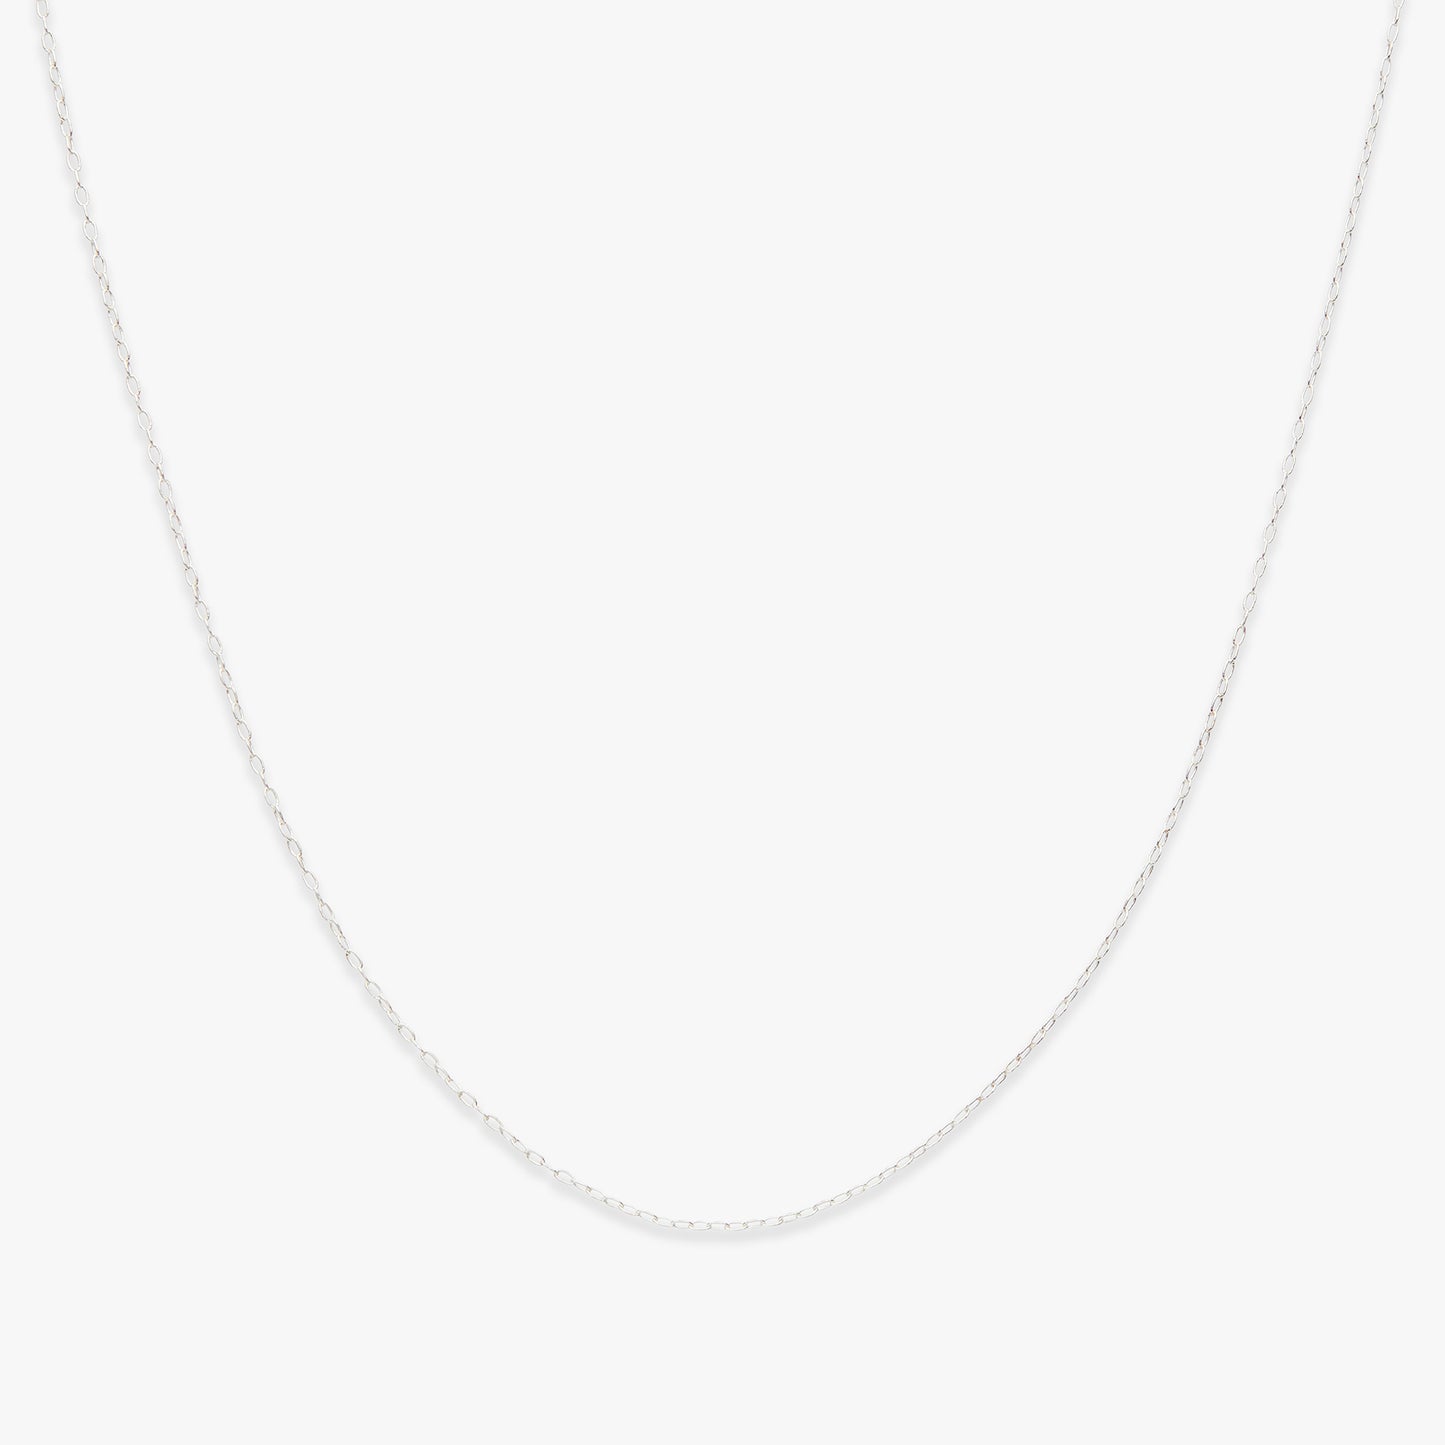 Basic drawn cable chain necklace silver